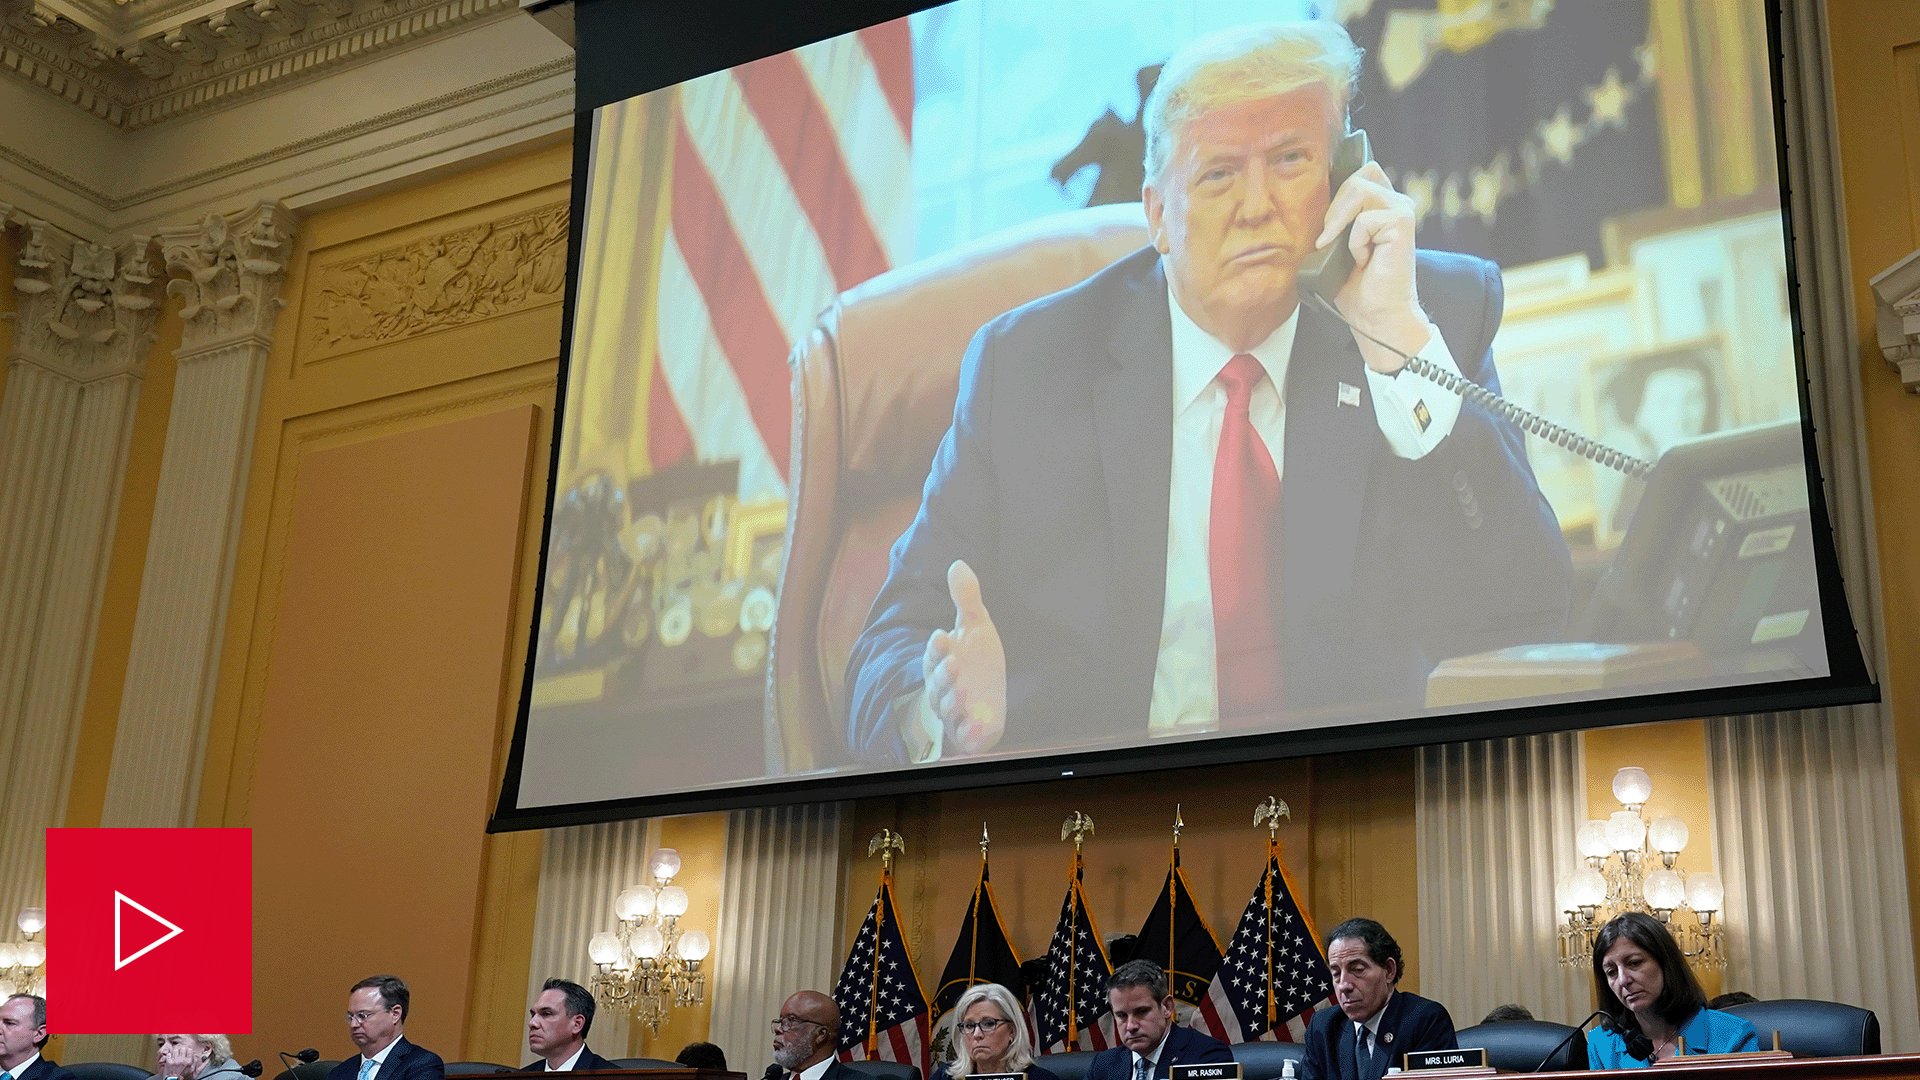 An image of former President Donald Trump is projected onto a screen during the Jan. 6 hearings.